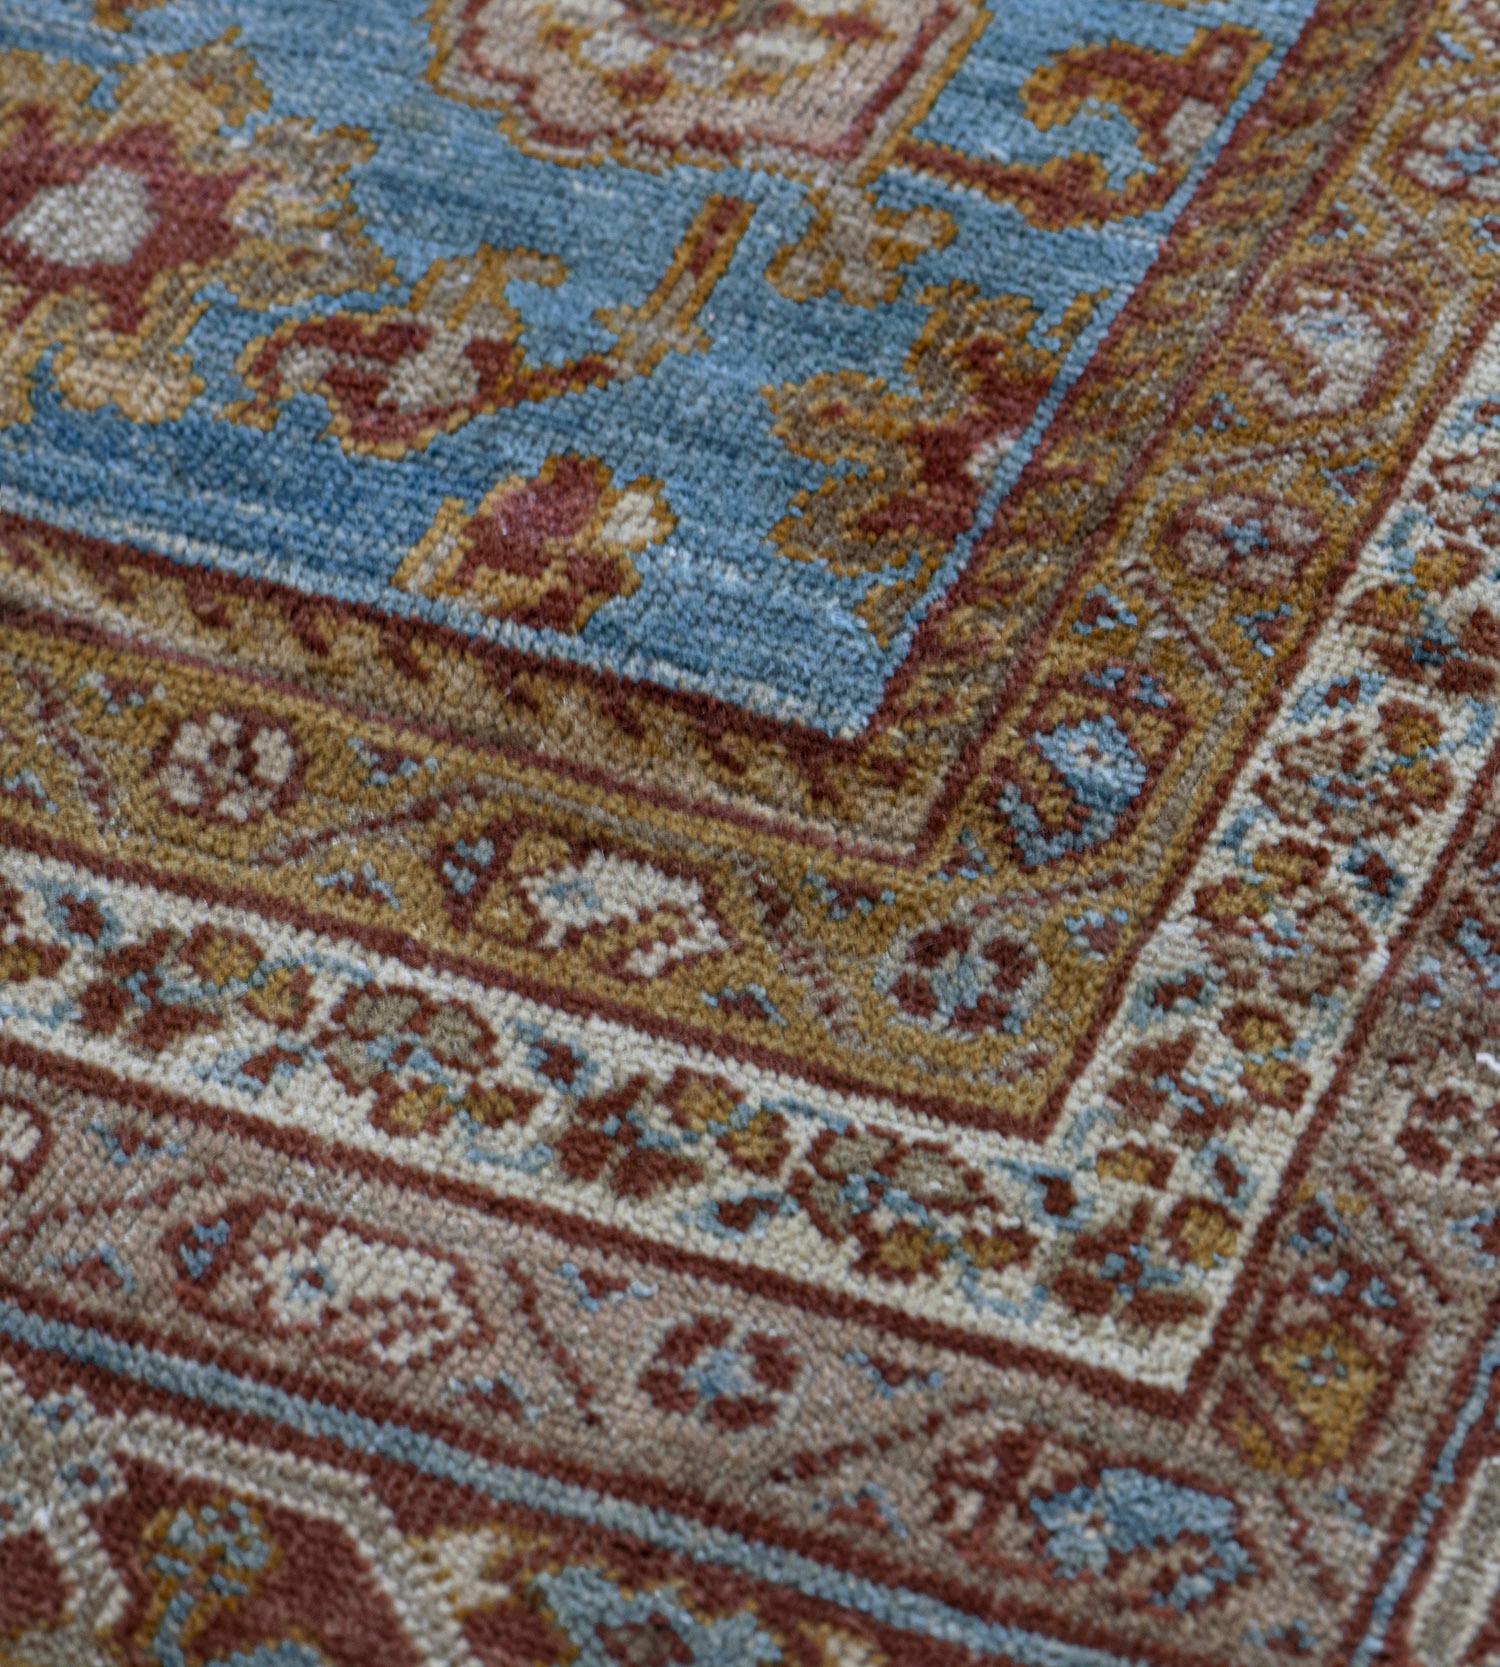 This traditional handwoven Persian Ziegler Sultanabad rug has a shaded medium-blue field with an overall design of angled taupe and rust palmettes enclosing central rosettes or lozenges issuing vines forming further lozenges, in a shaded rust border